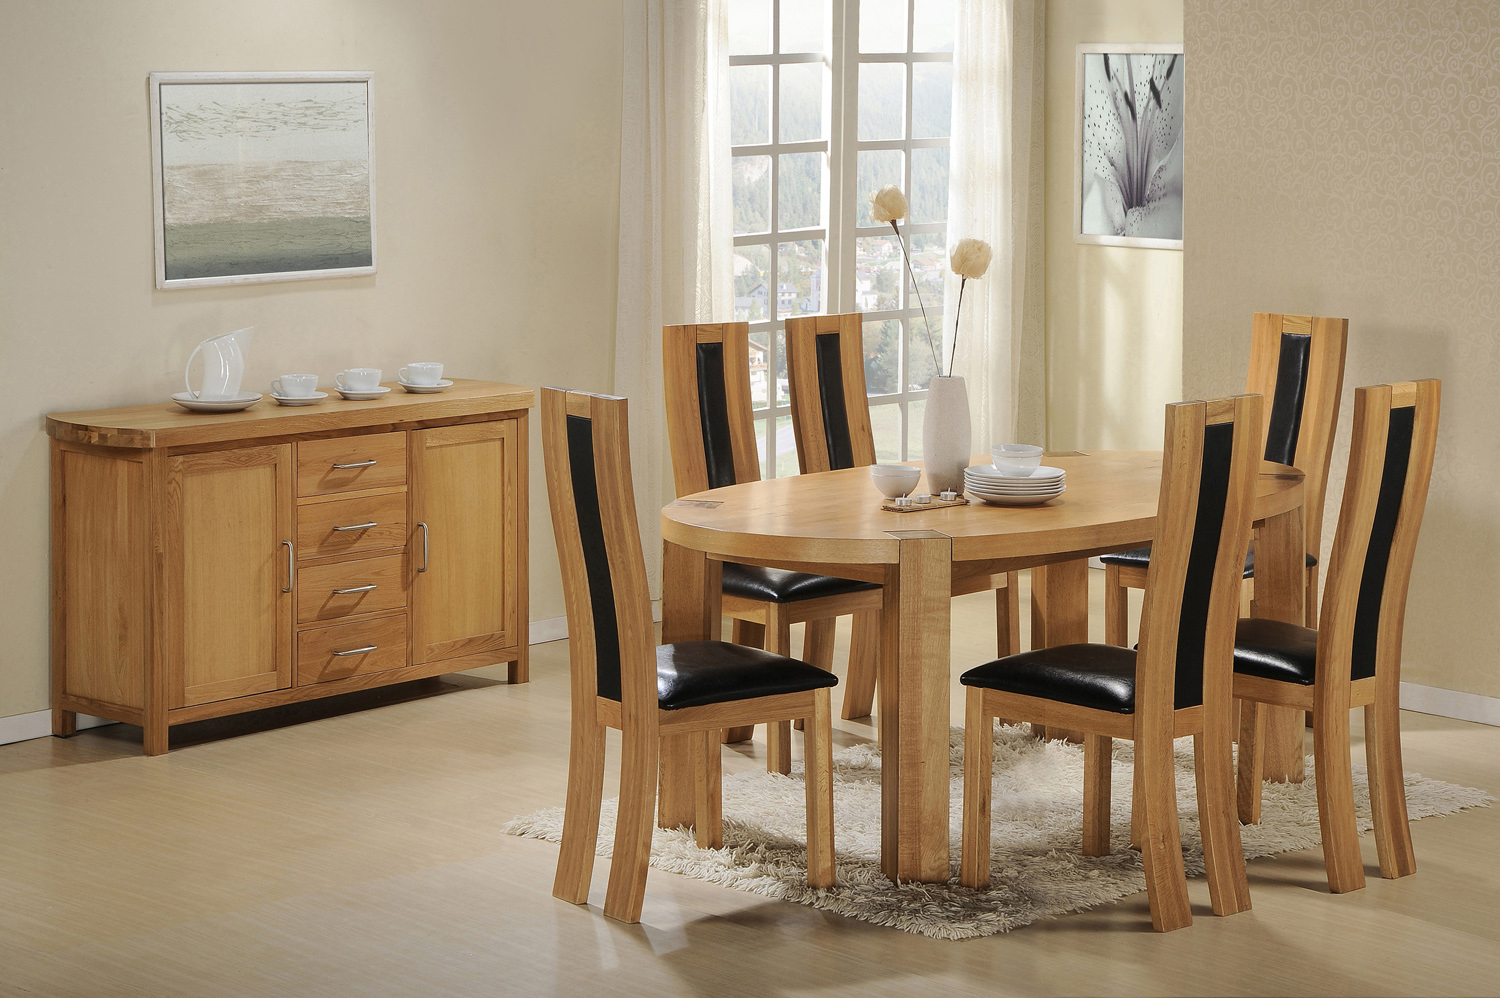 Oval dining table for 6 18